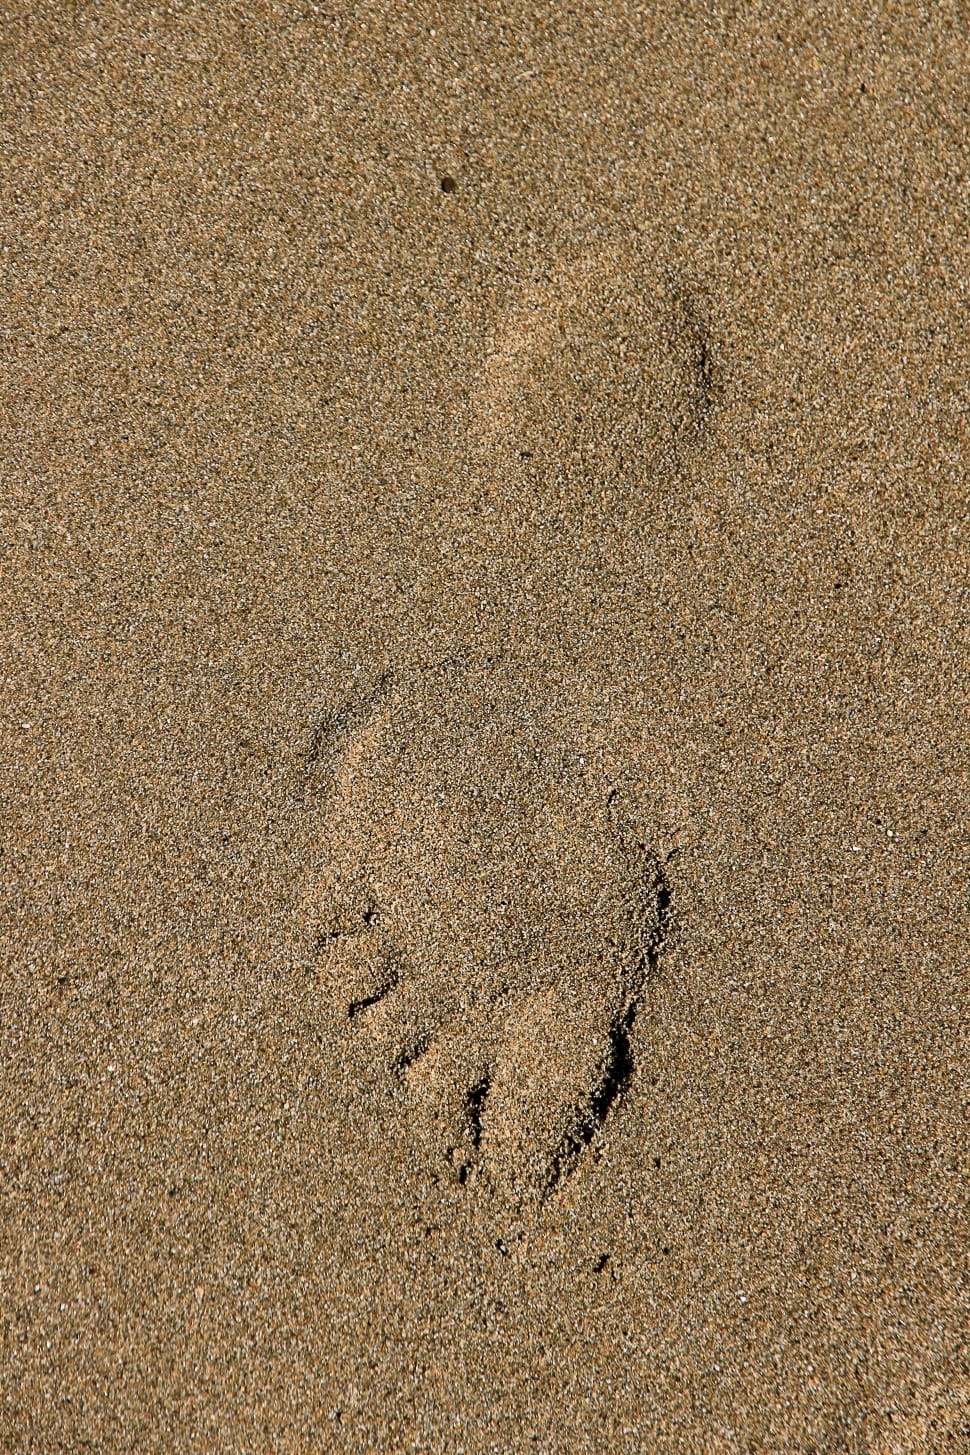 sand foot print preview